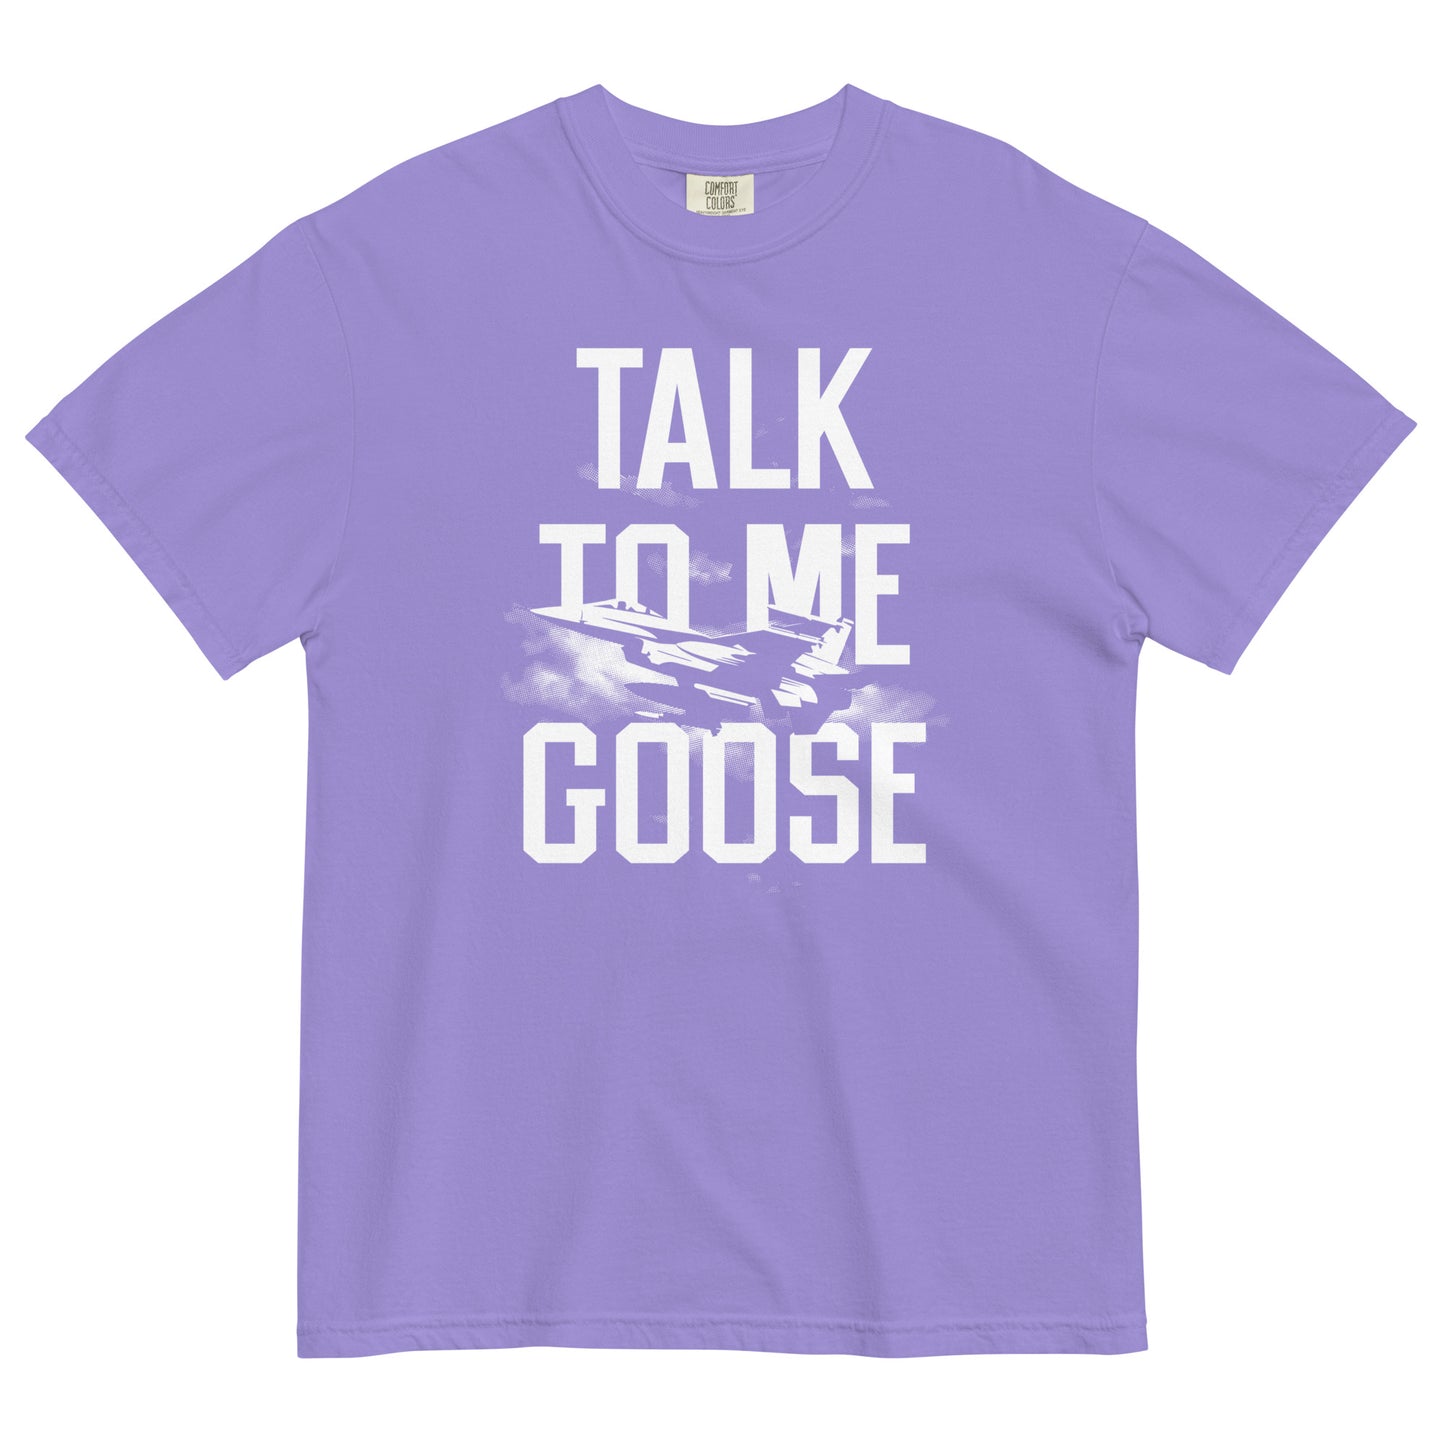 Talk To Me Goose Men's Relaxed Fit Tee